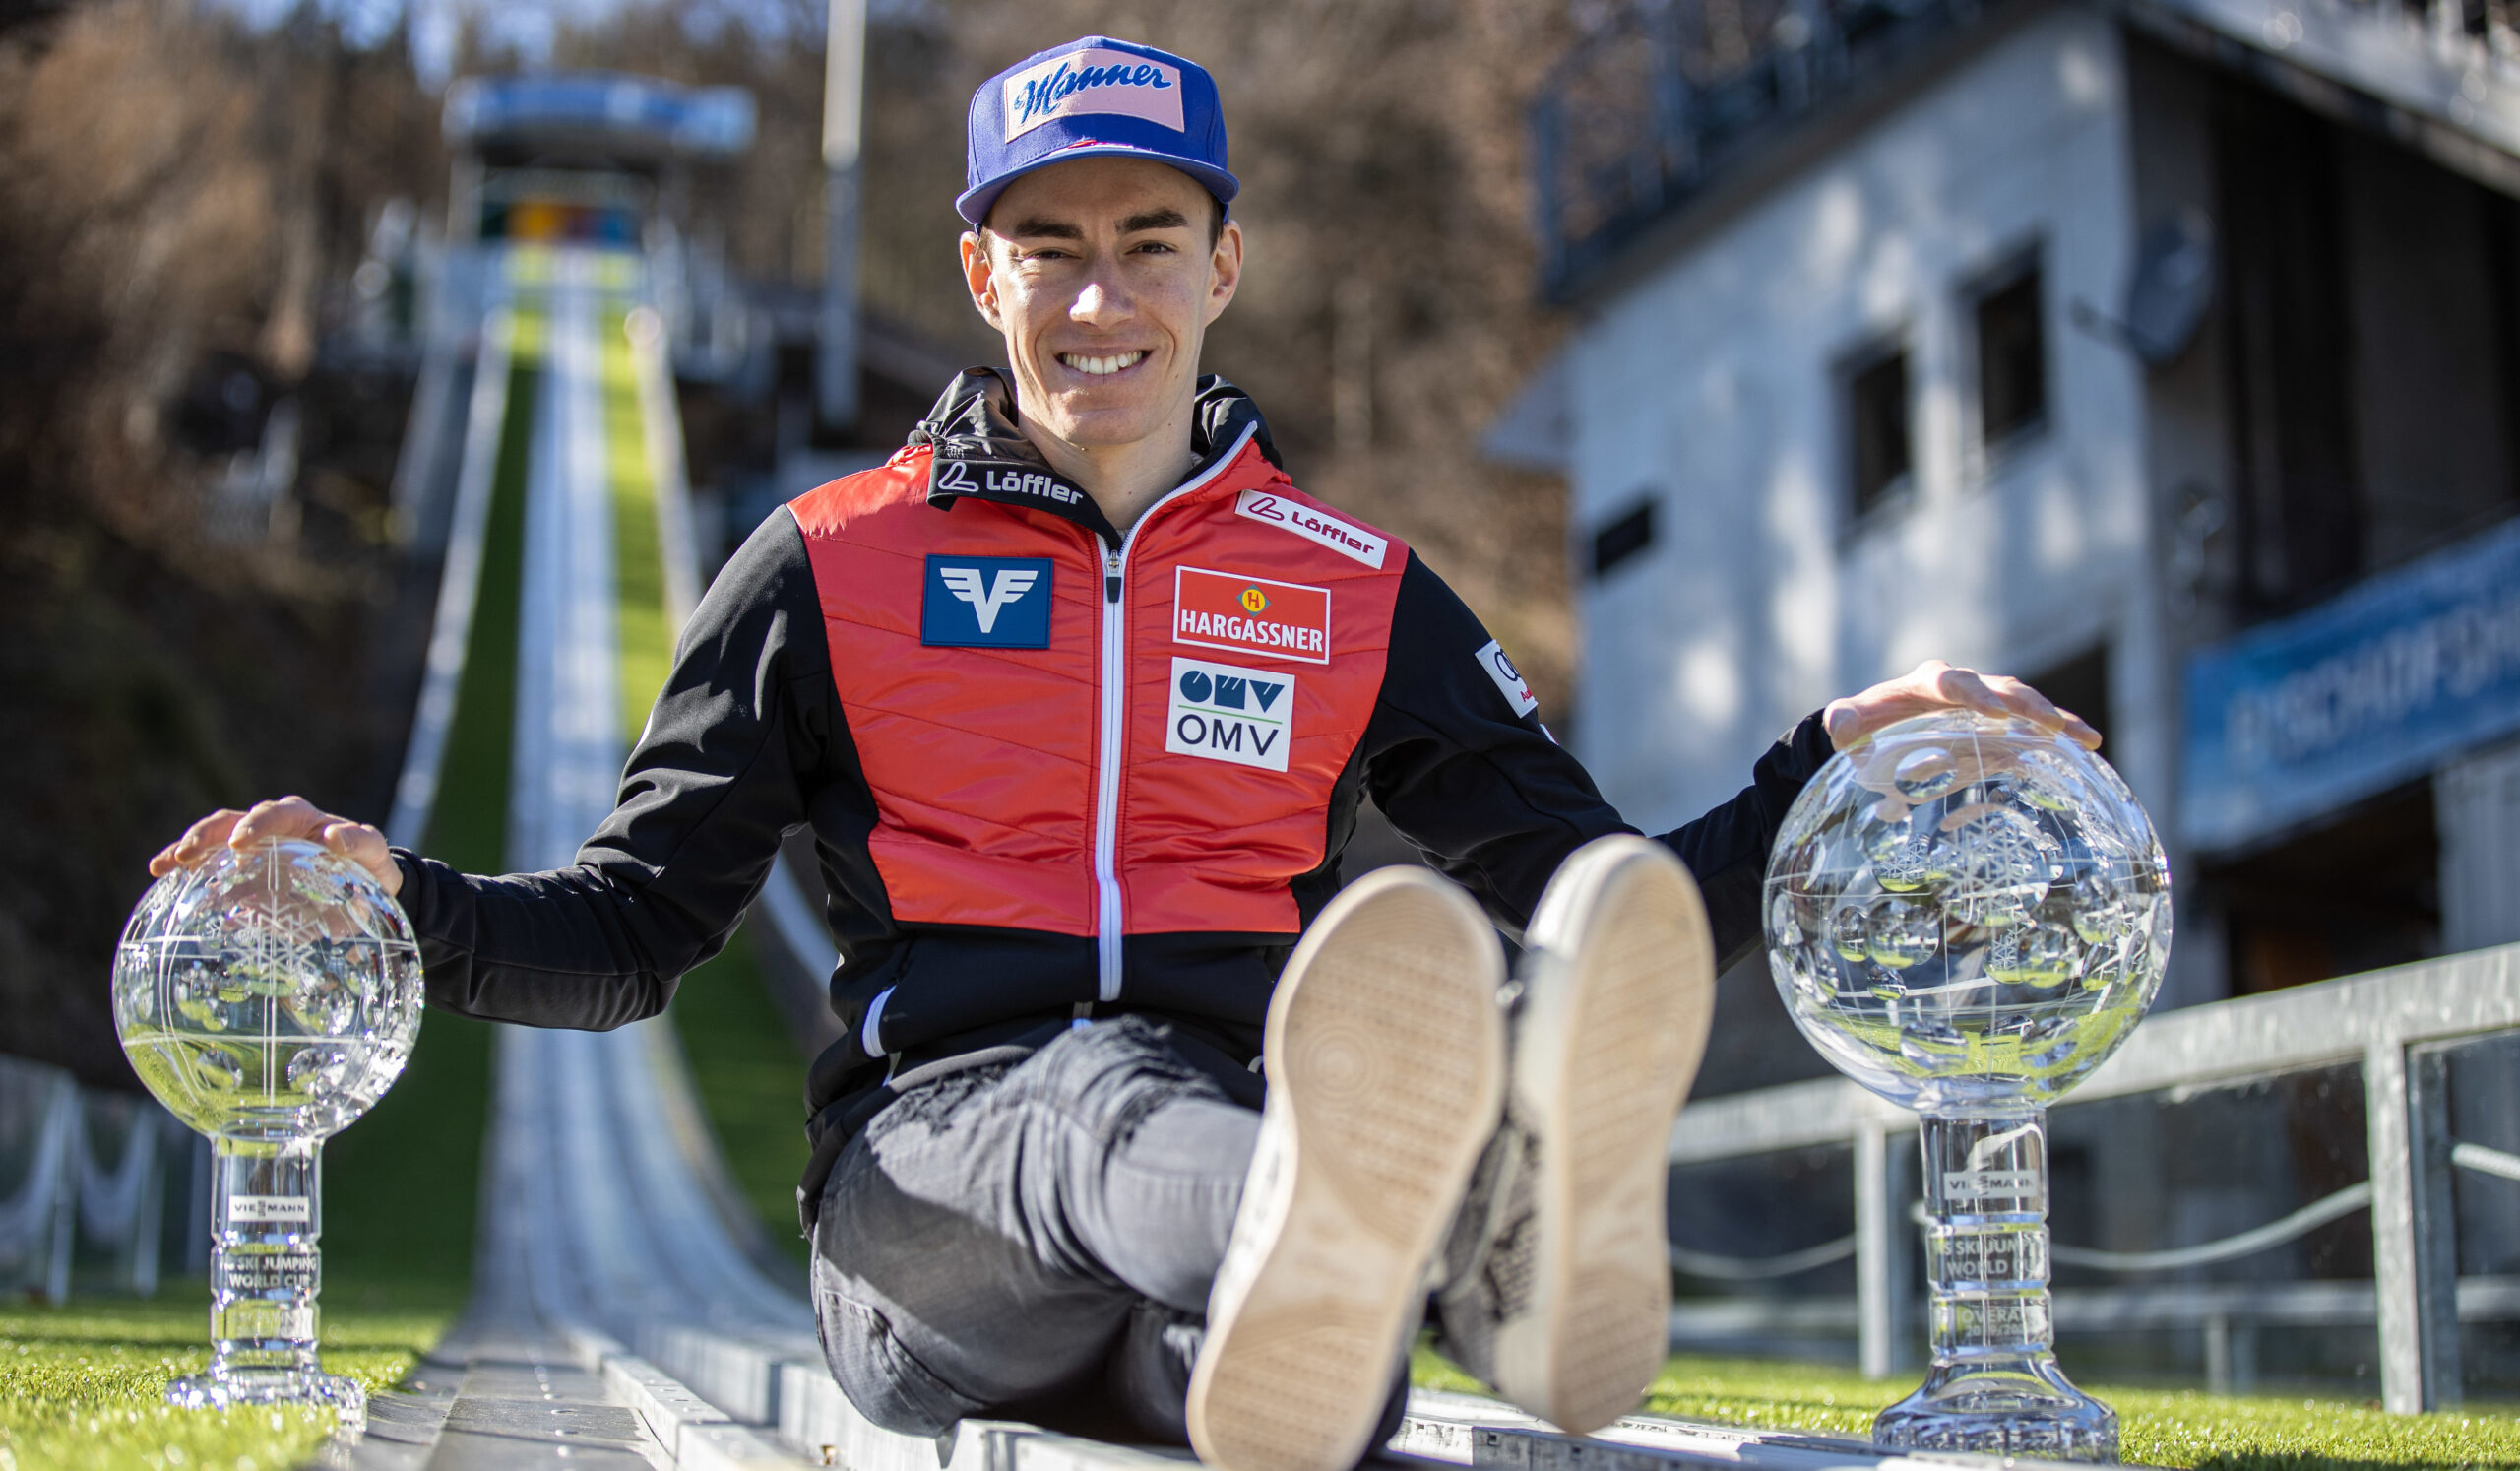 BISCHOFSHOFEN,AUSTRIA,16.MAR.20 - NORDIC SKIING, SKI JUMPING - FIS World Cup, overall World Cup photo shooting. Image shows Stefan Kraft (AUT). Keywords: trophy, crystal globe. Photo: GEPA pictures/ Harald Steiner